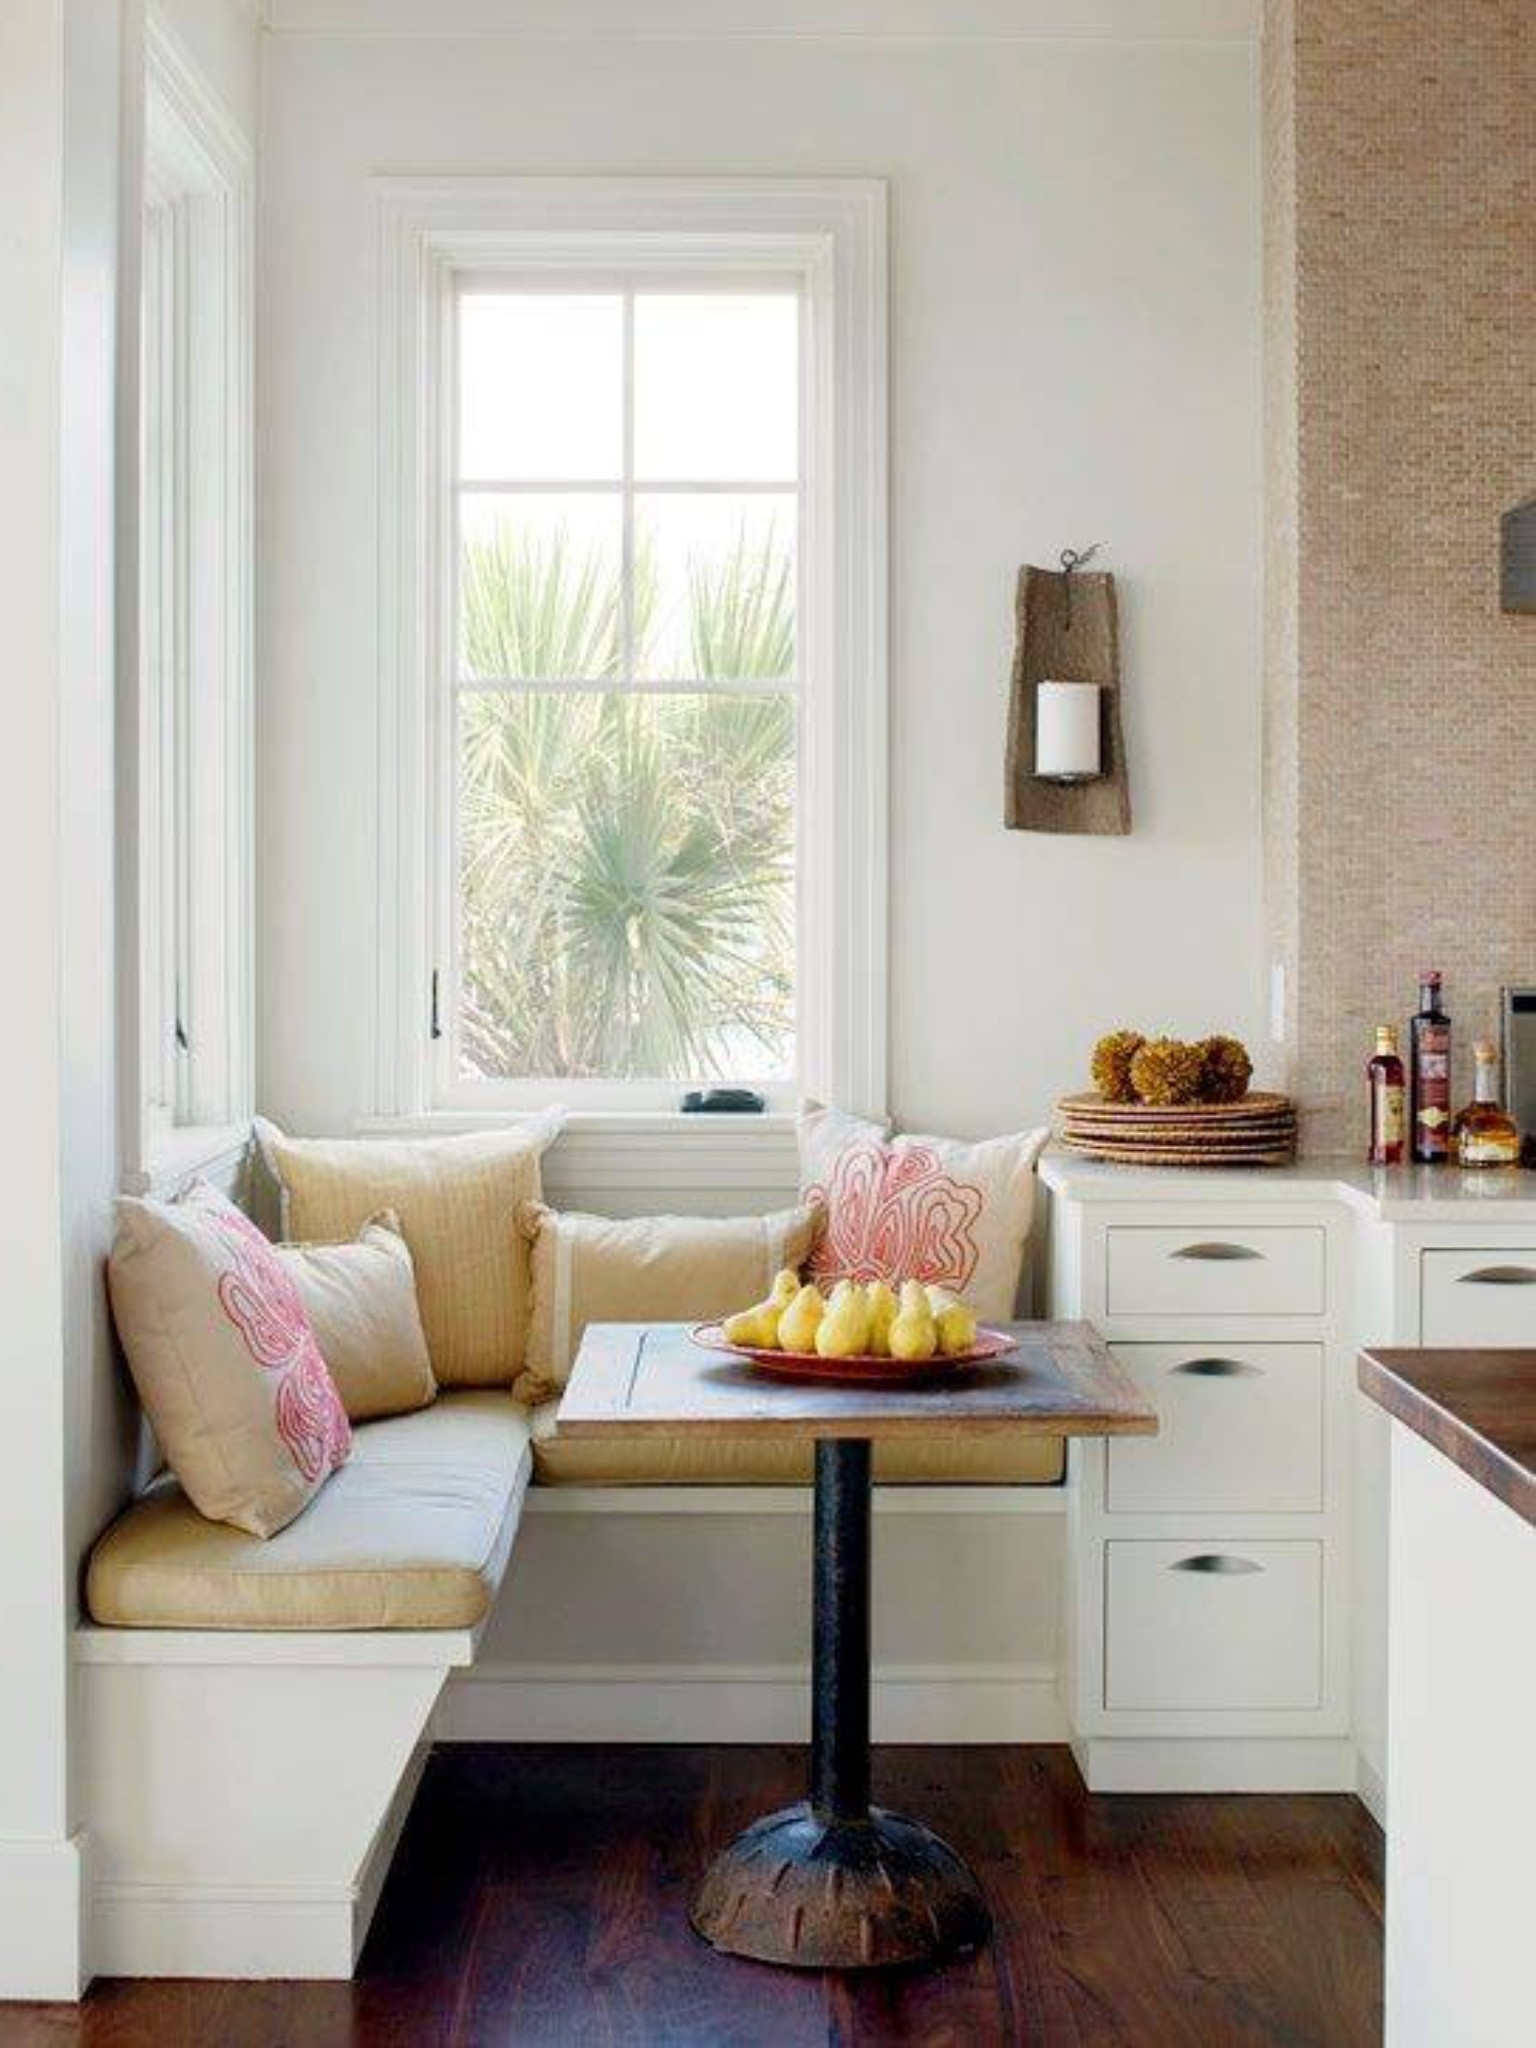 Space Saving Interior Design Ideas for Corner Kitchen Nooks and Dining Areas